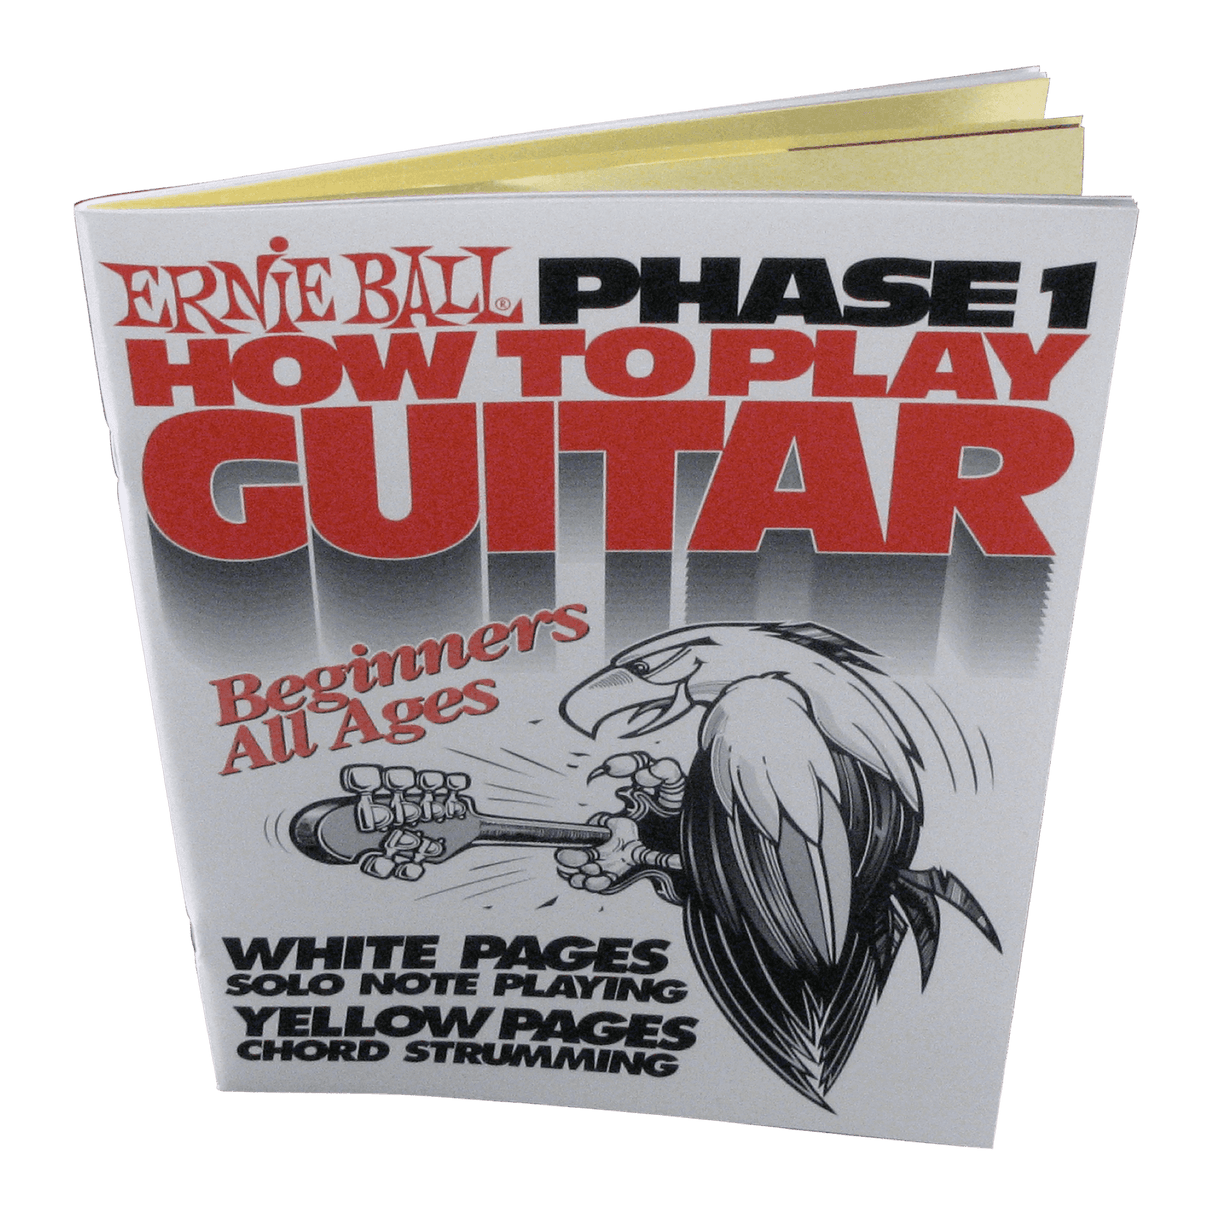 ERNIE BALL How to Play Guitar Book - PHASE 1